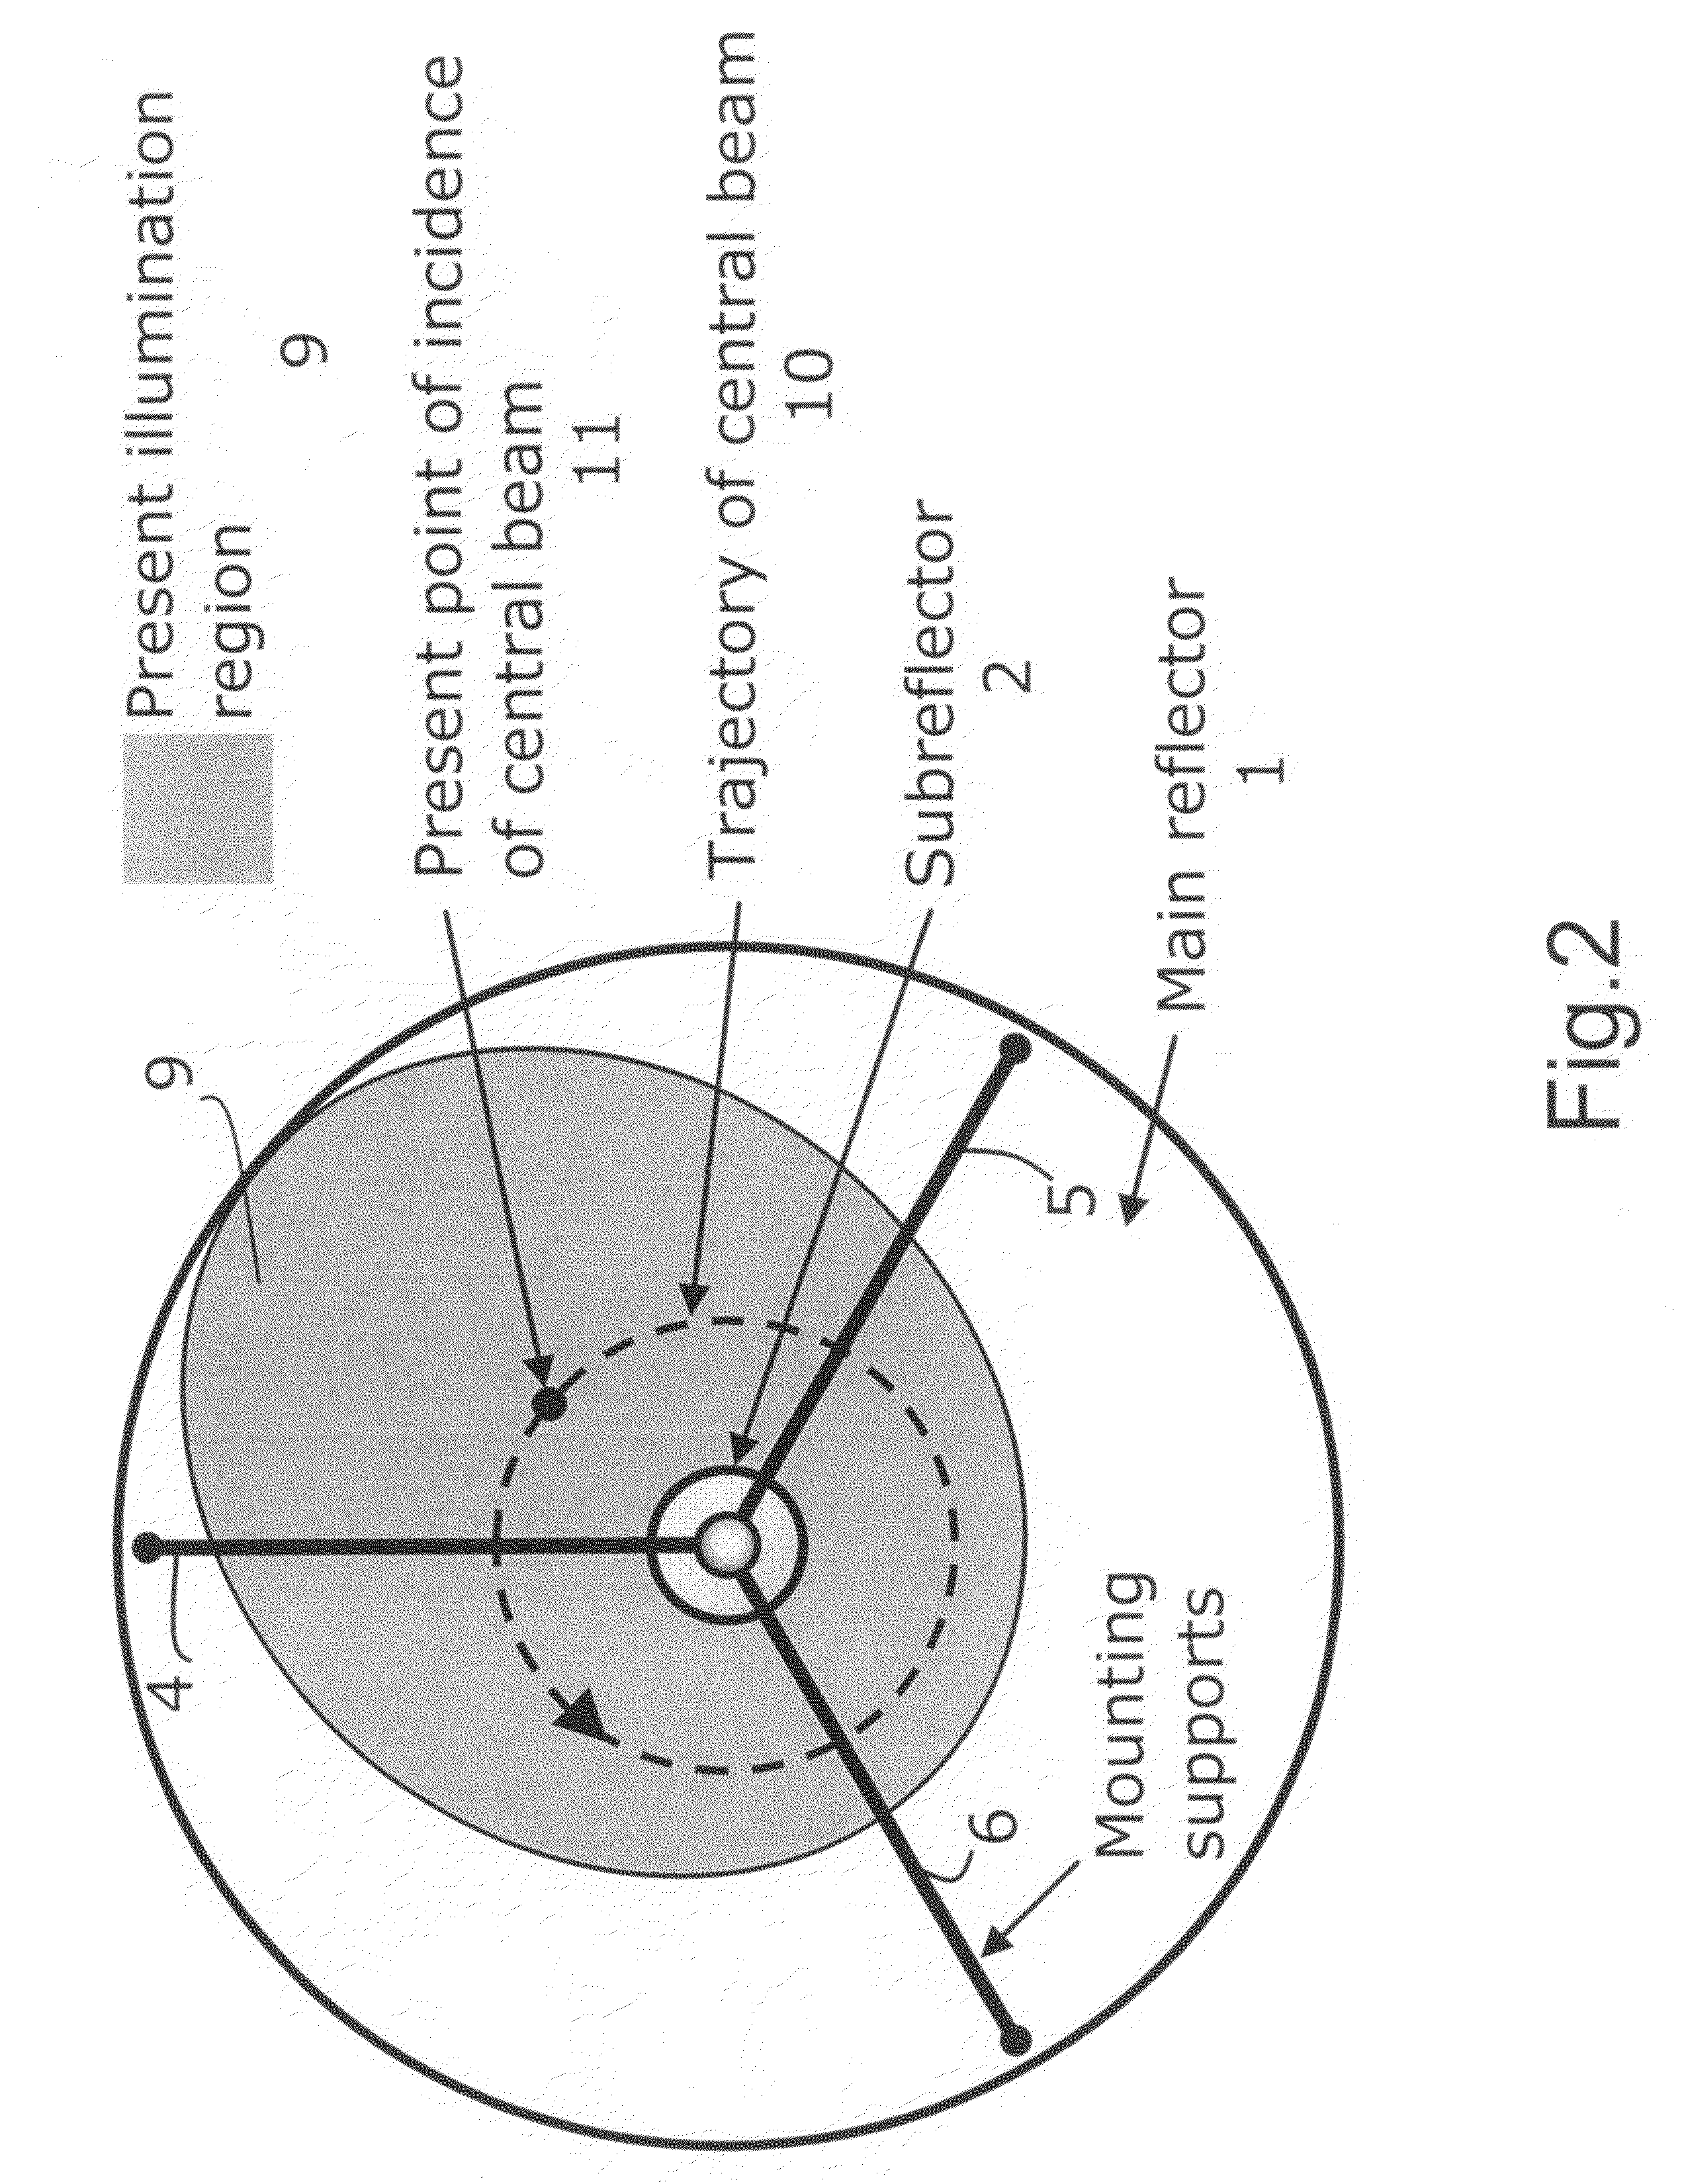 Device for two-dimensional imaging of scenes by microwave scanning